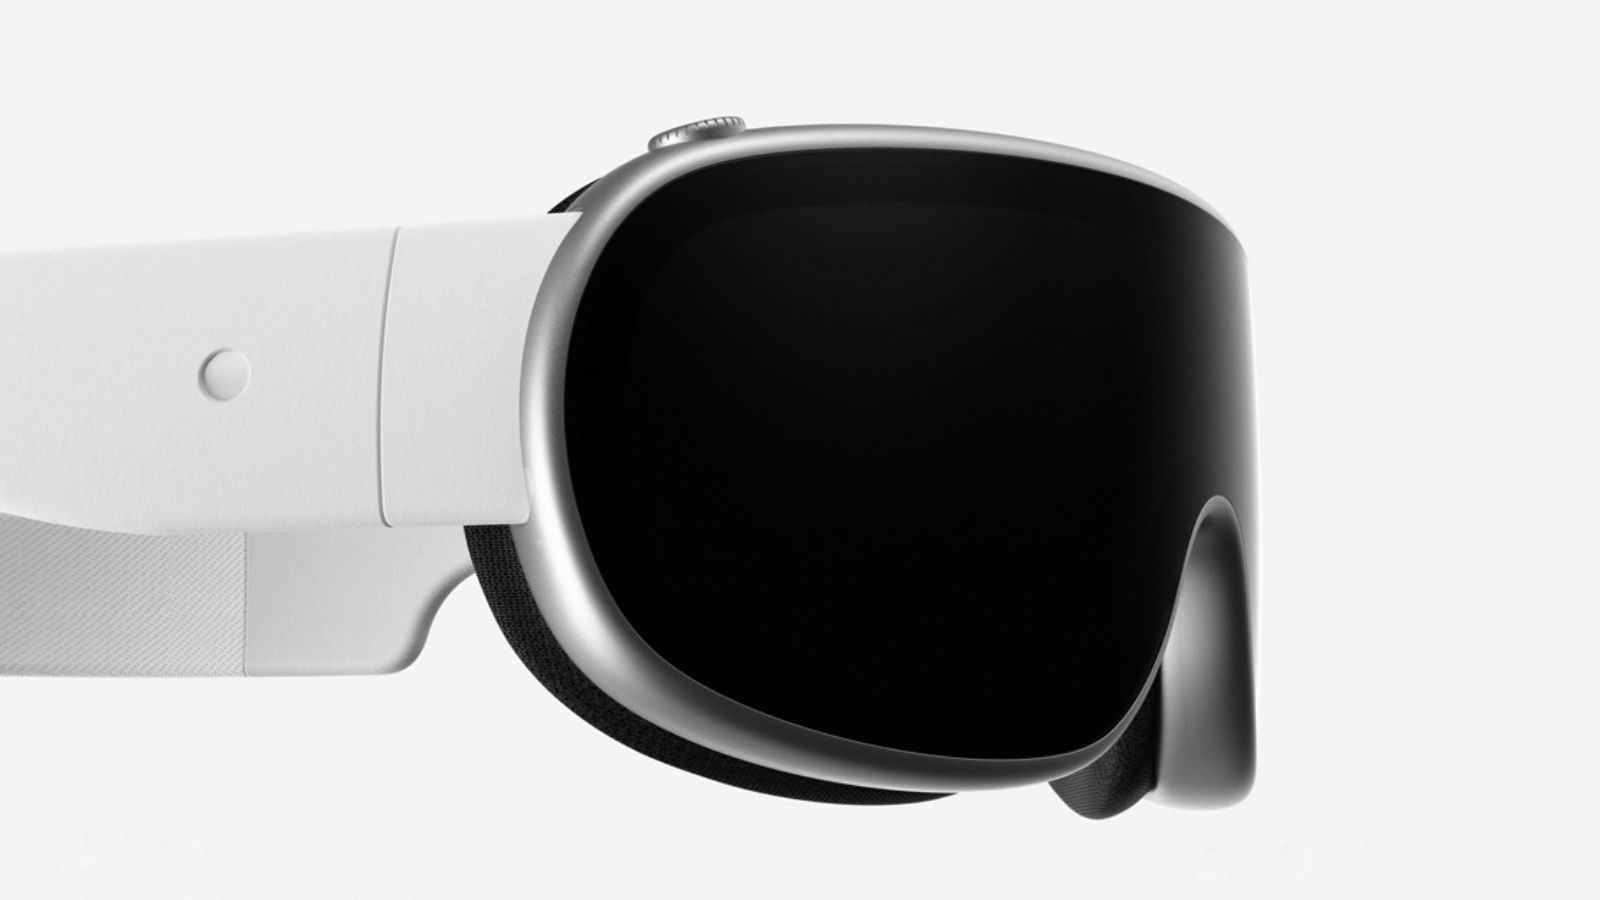 Some Apple Employees Seriously Concerned About Mixed-Reality Headset as Launch Draws Closer